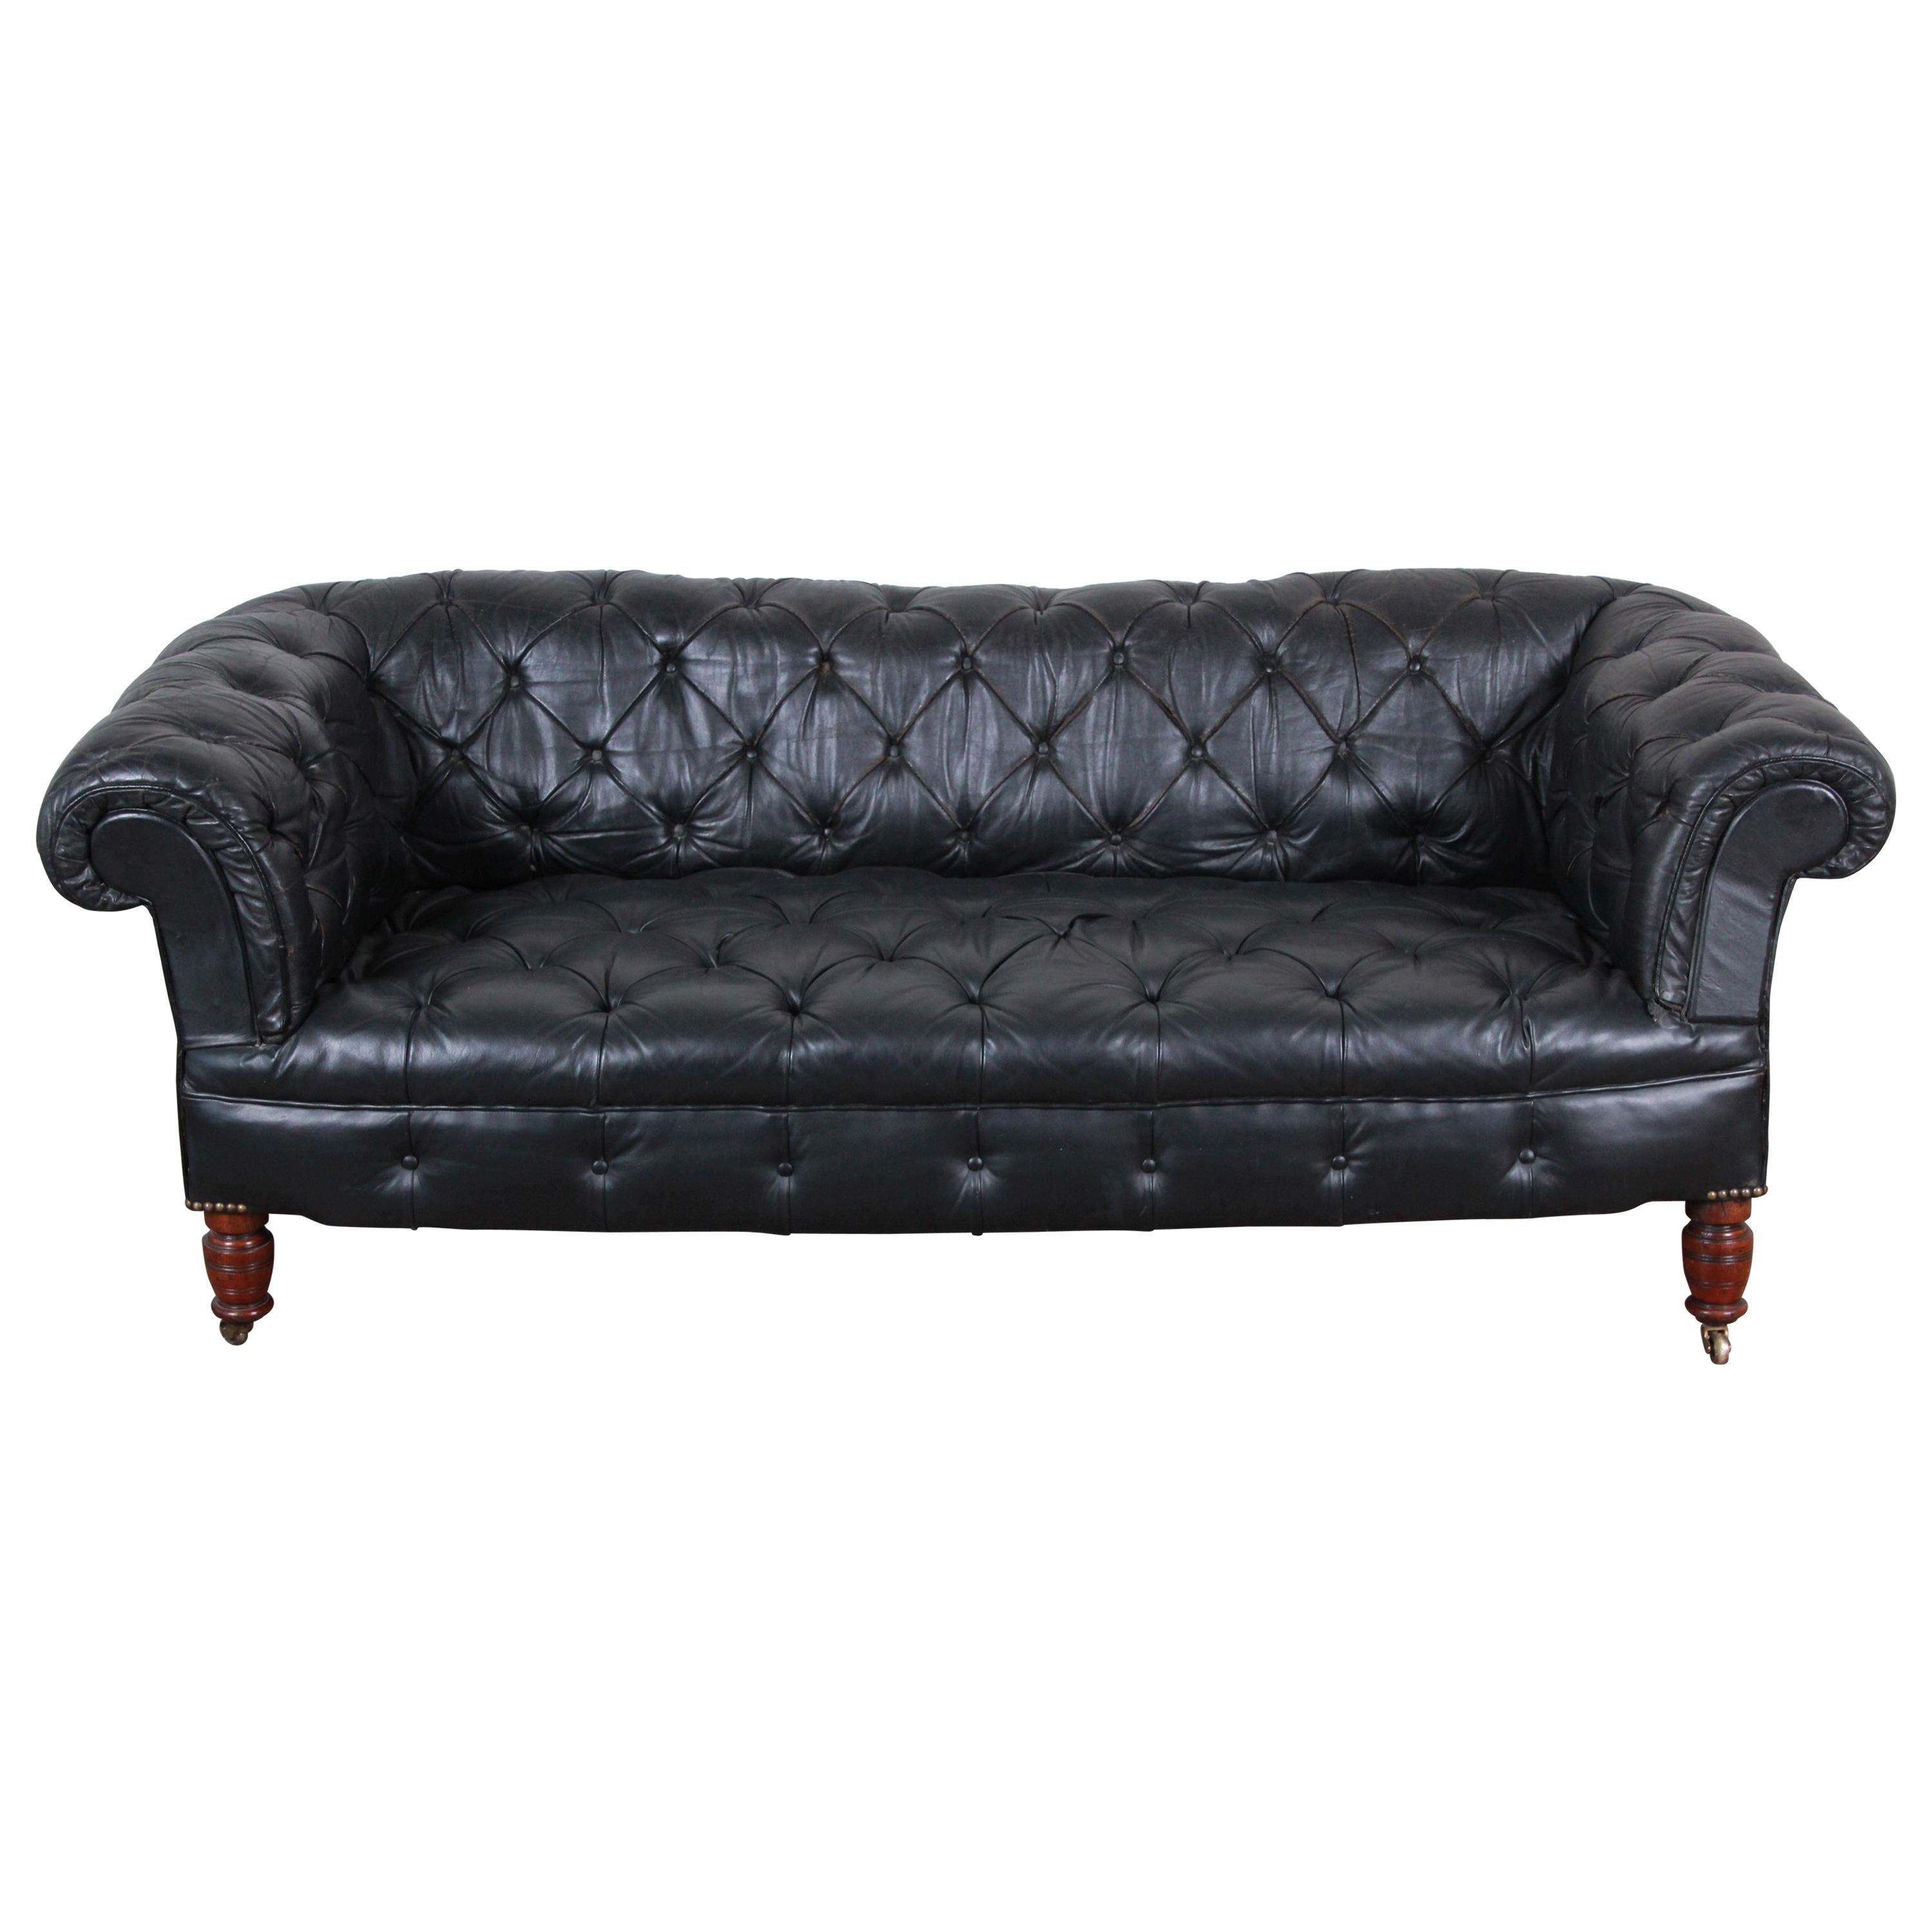 Vintage Tufted Black Leather Chesterfield Sofa, circa 1960s